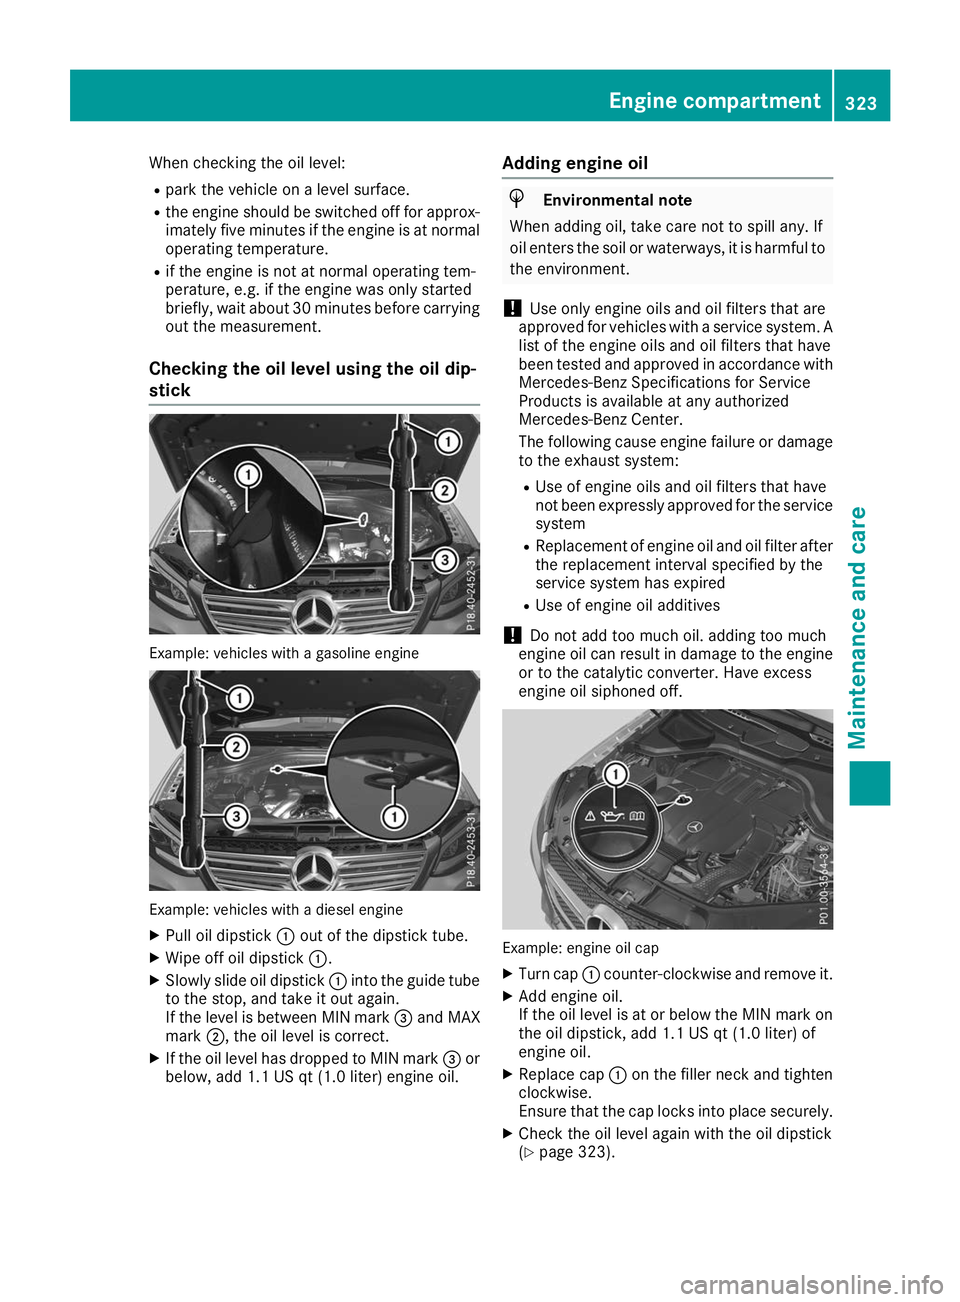 MERCEDES-BENZ GLE 2019  Owners Manual When checking the oil level:
R
park the vehicle on a level surface.
R the engine should be switched off for approx-
imately five minutes if the engine is at normal
operating temperature.
R if the engi